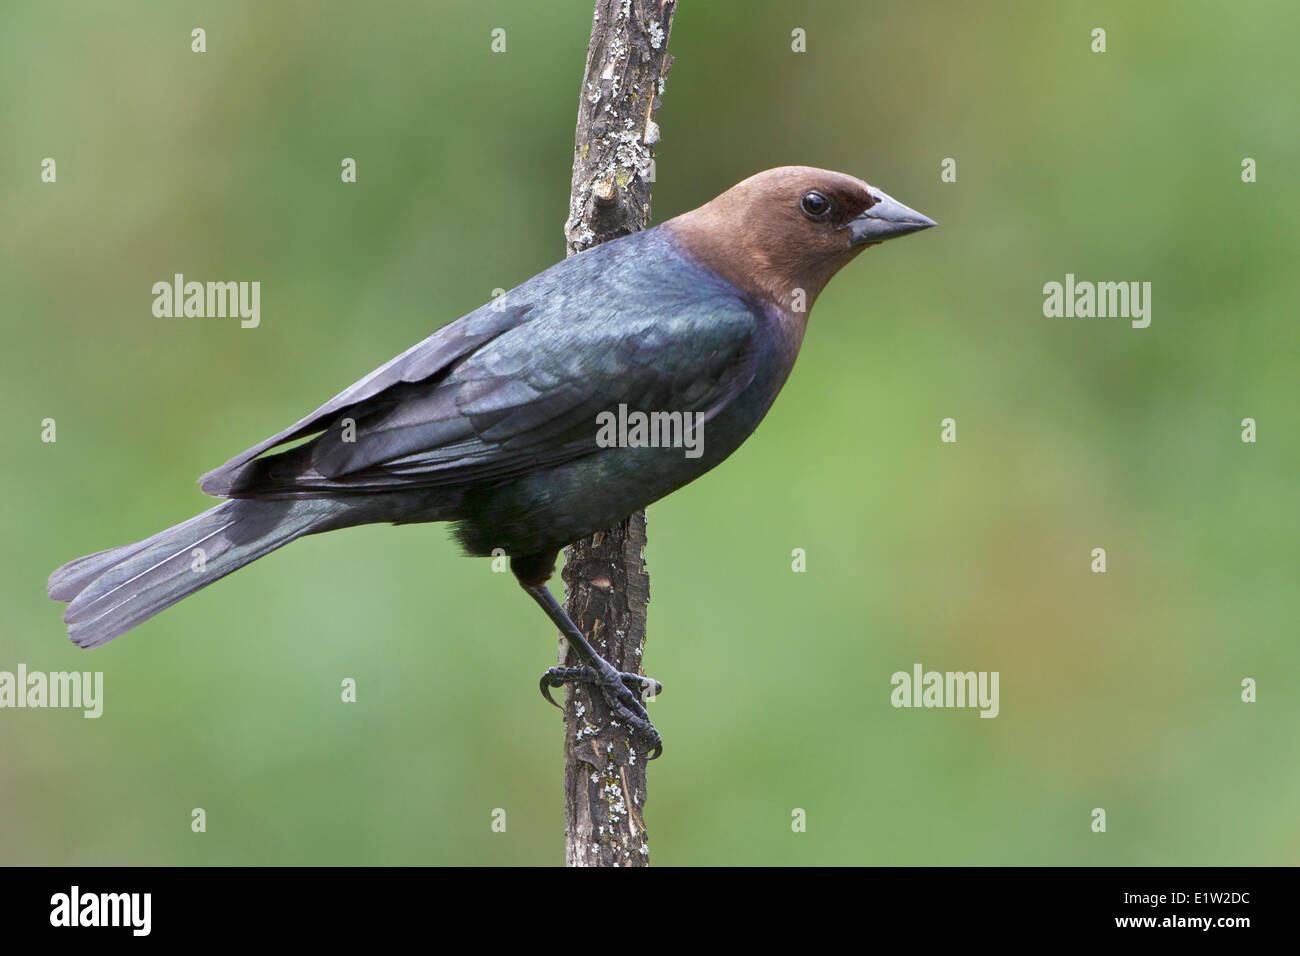 Brown-headed Cowbird, Molothrus ater, perched on a branch in Eastern Ontario, Canada. Stock Photo